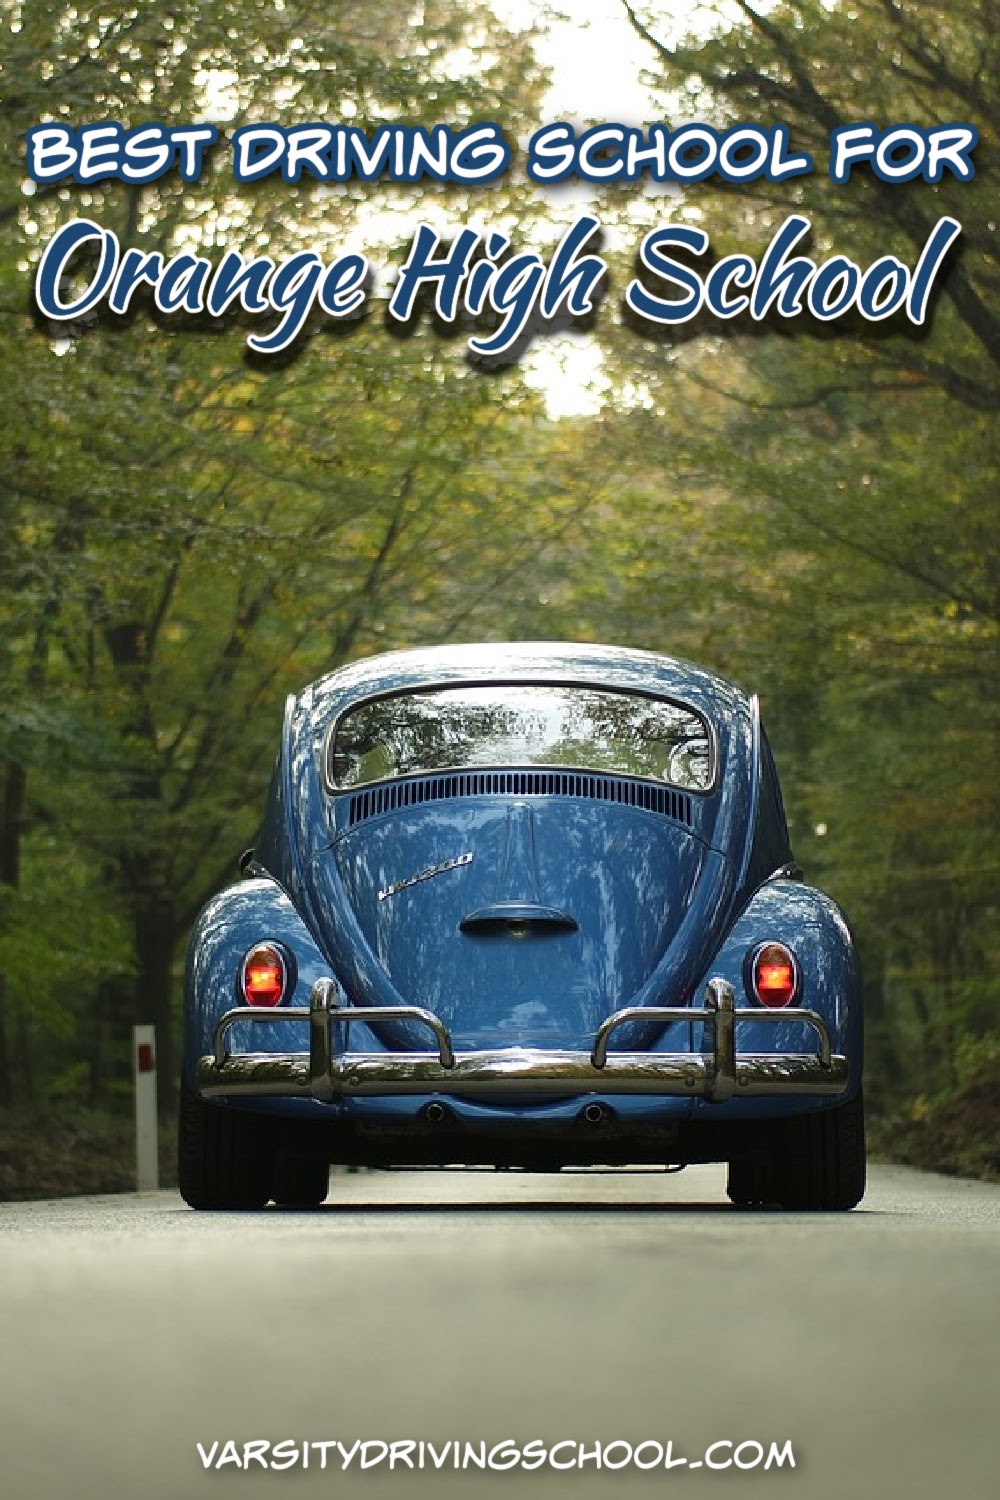 The best Orange High School driving school is Varsity Driving School, where success and safety are the goals.